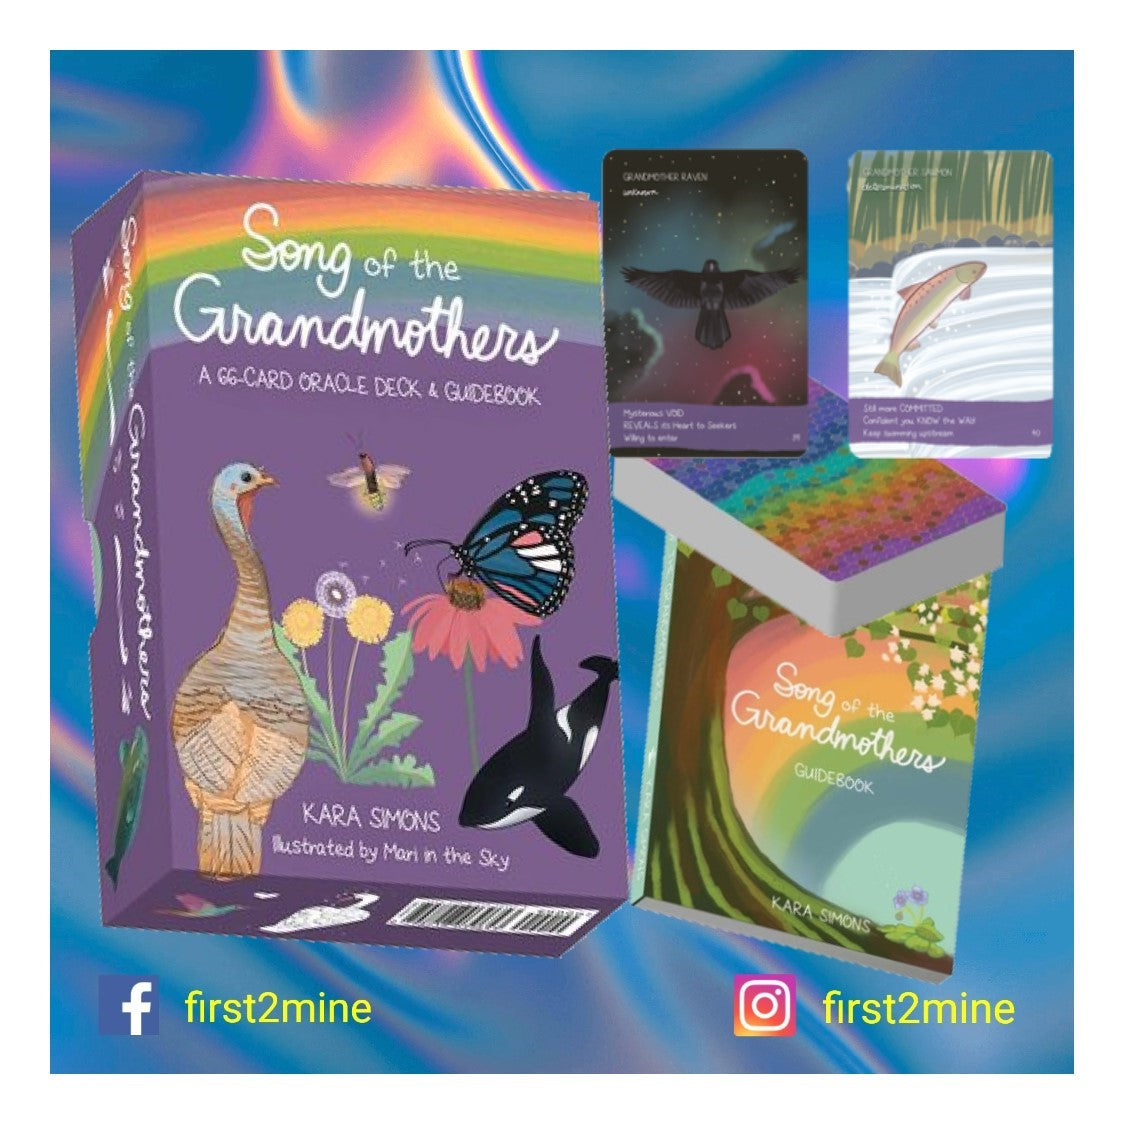 Song of the Grandmothers Oracle Deck (FLASH SALE!!!)